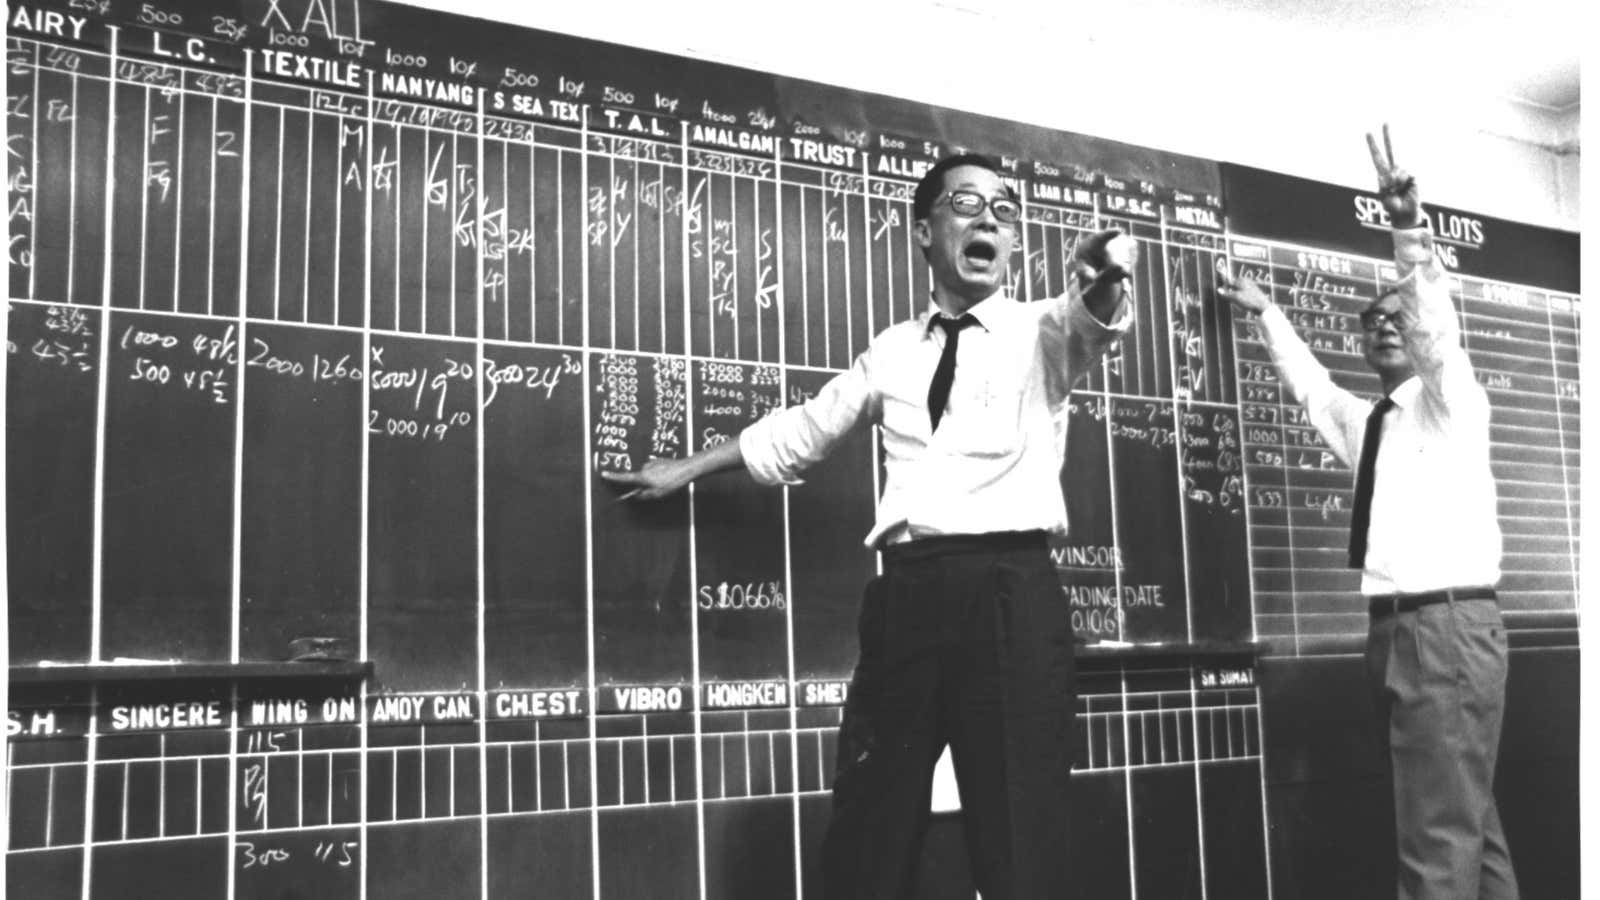 Stock trading in Hong Kong in the 1970s, believed to be at the old Hong Kong Stock Exchange.